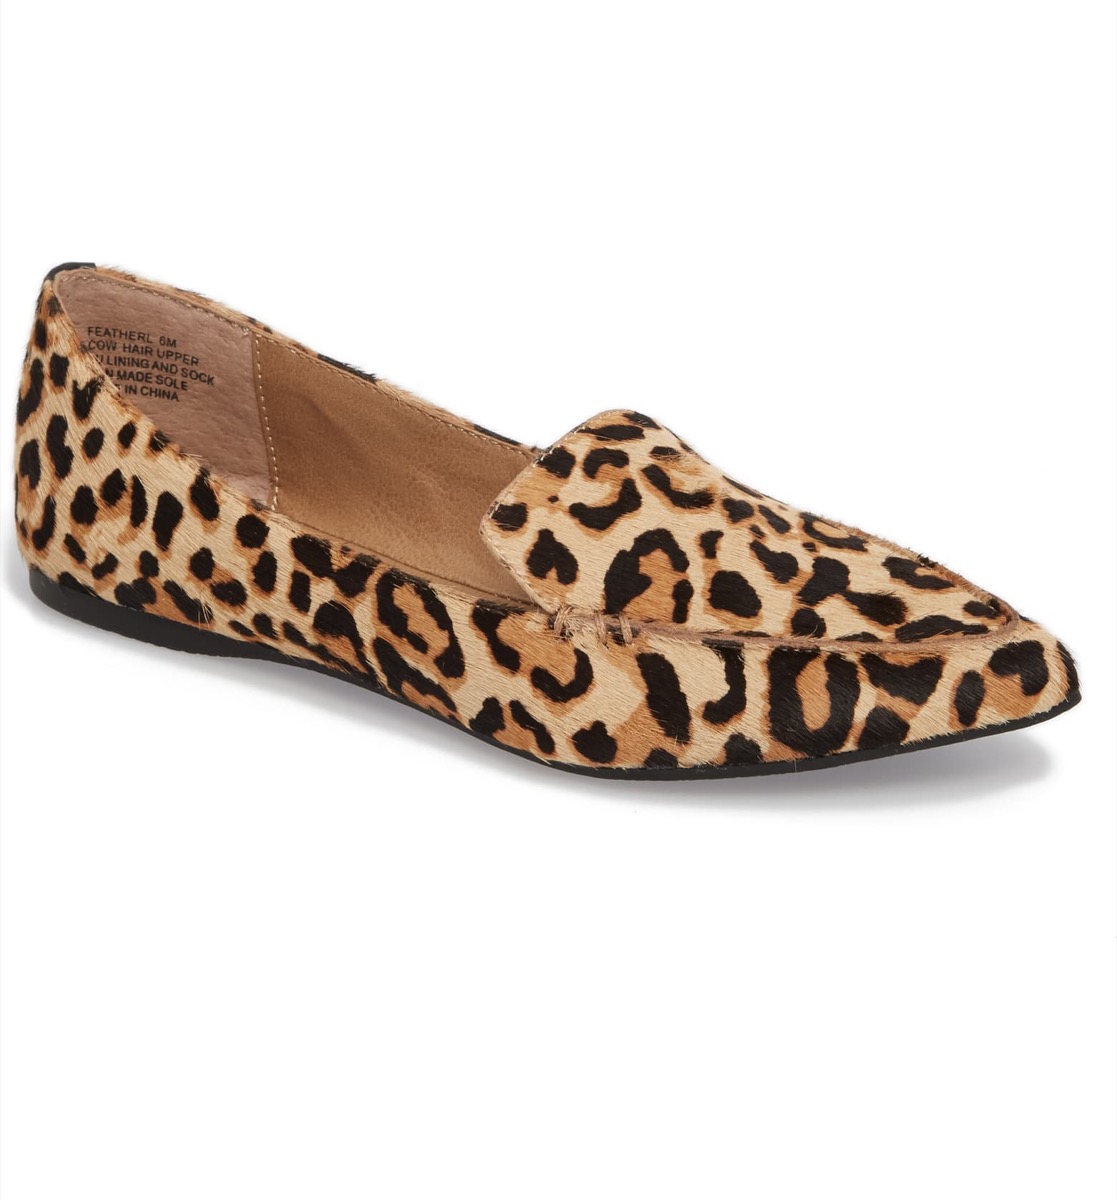 leopard print flats with pointed toe